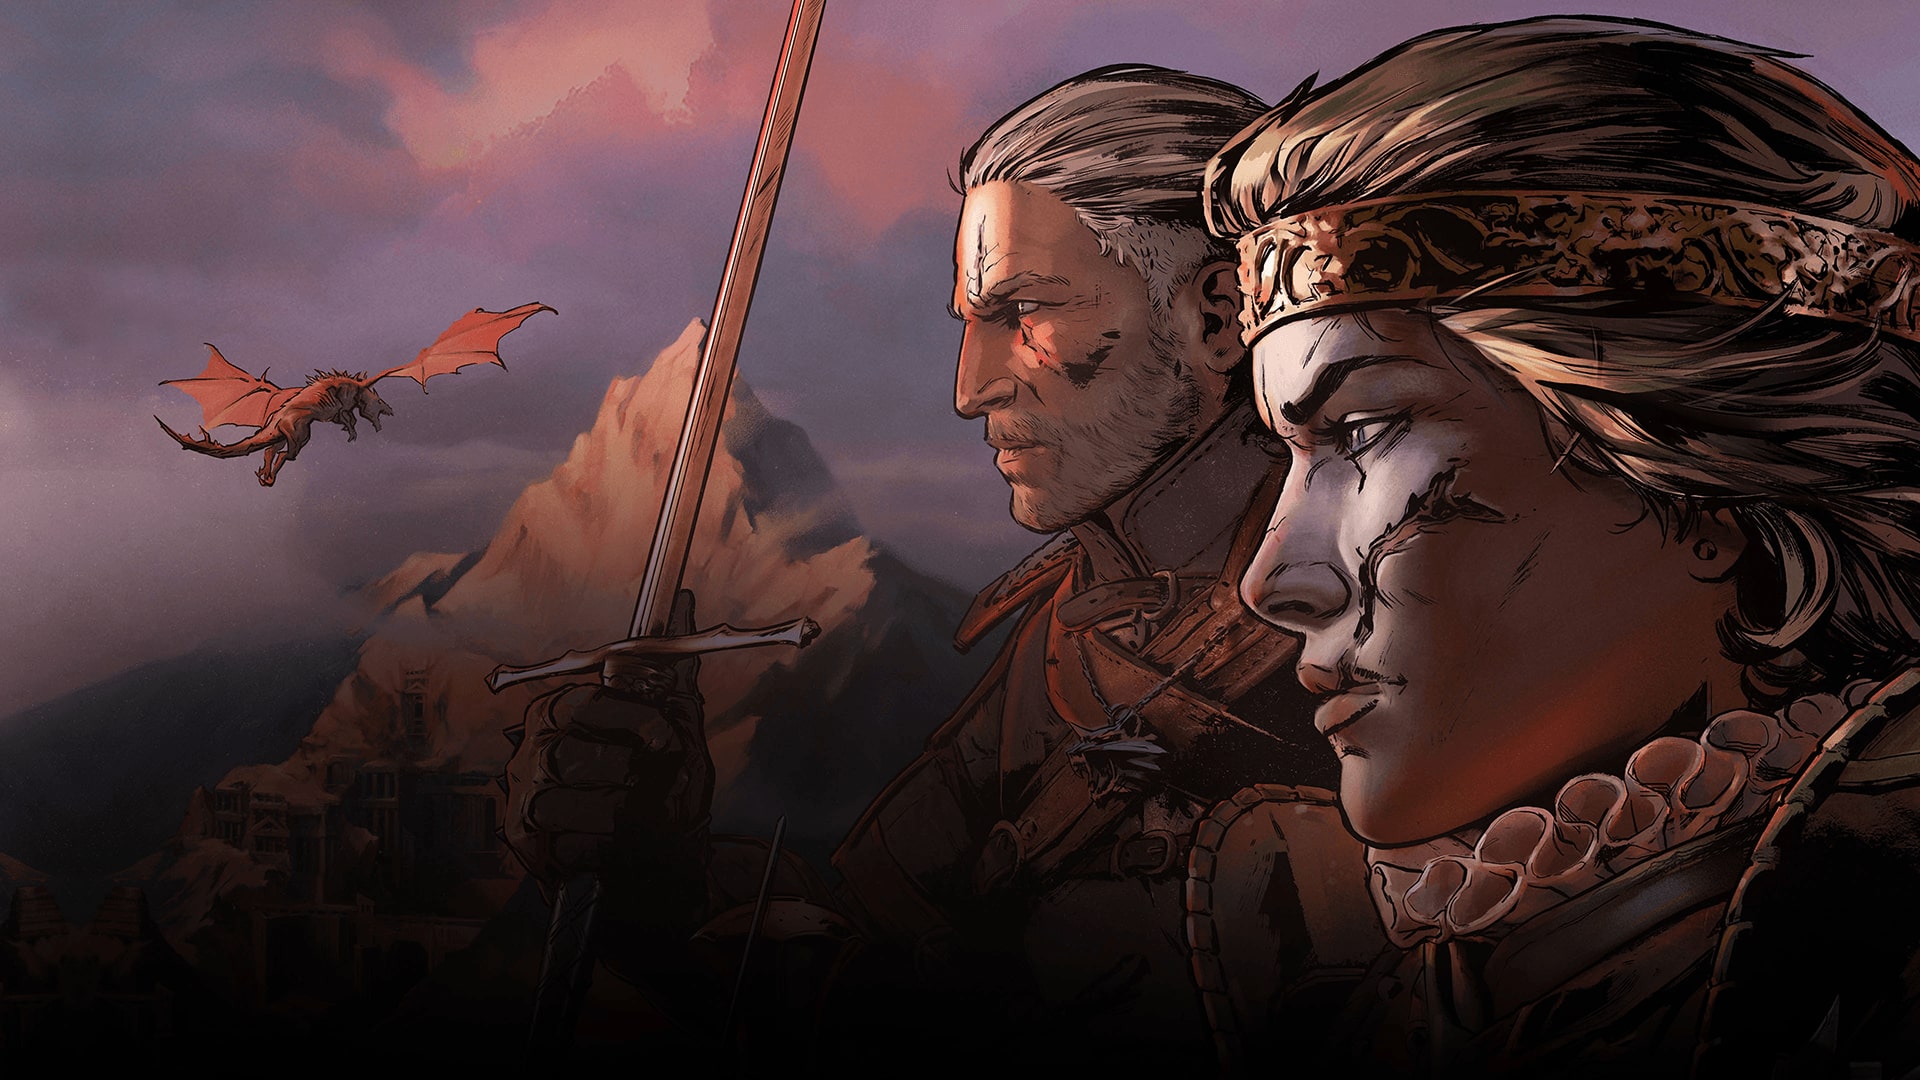 Thronebreaker: The Witcher Tales (Simplified Chinese, English, Korean, Japanese)